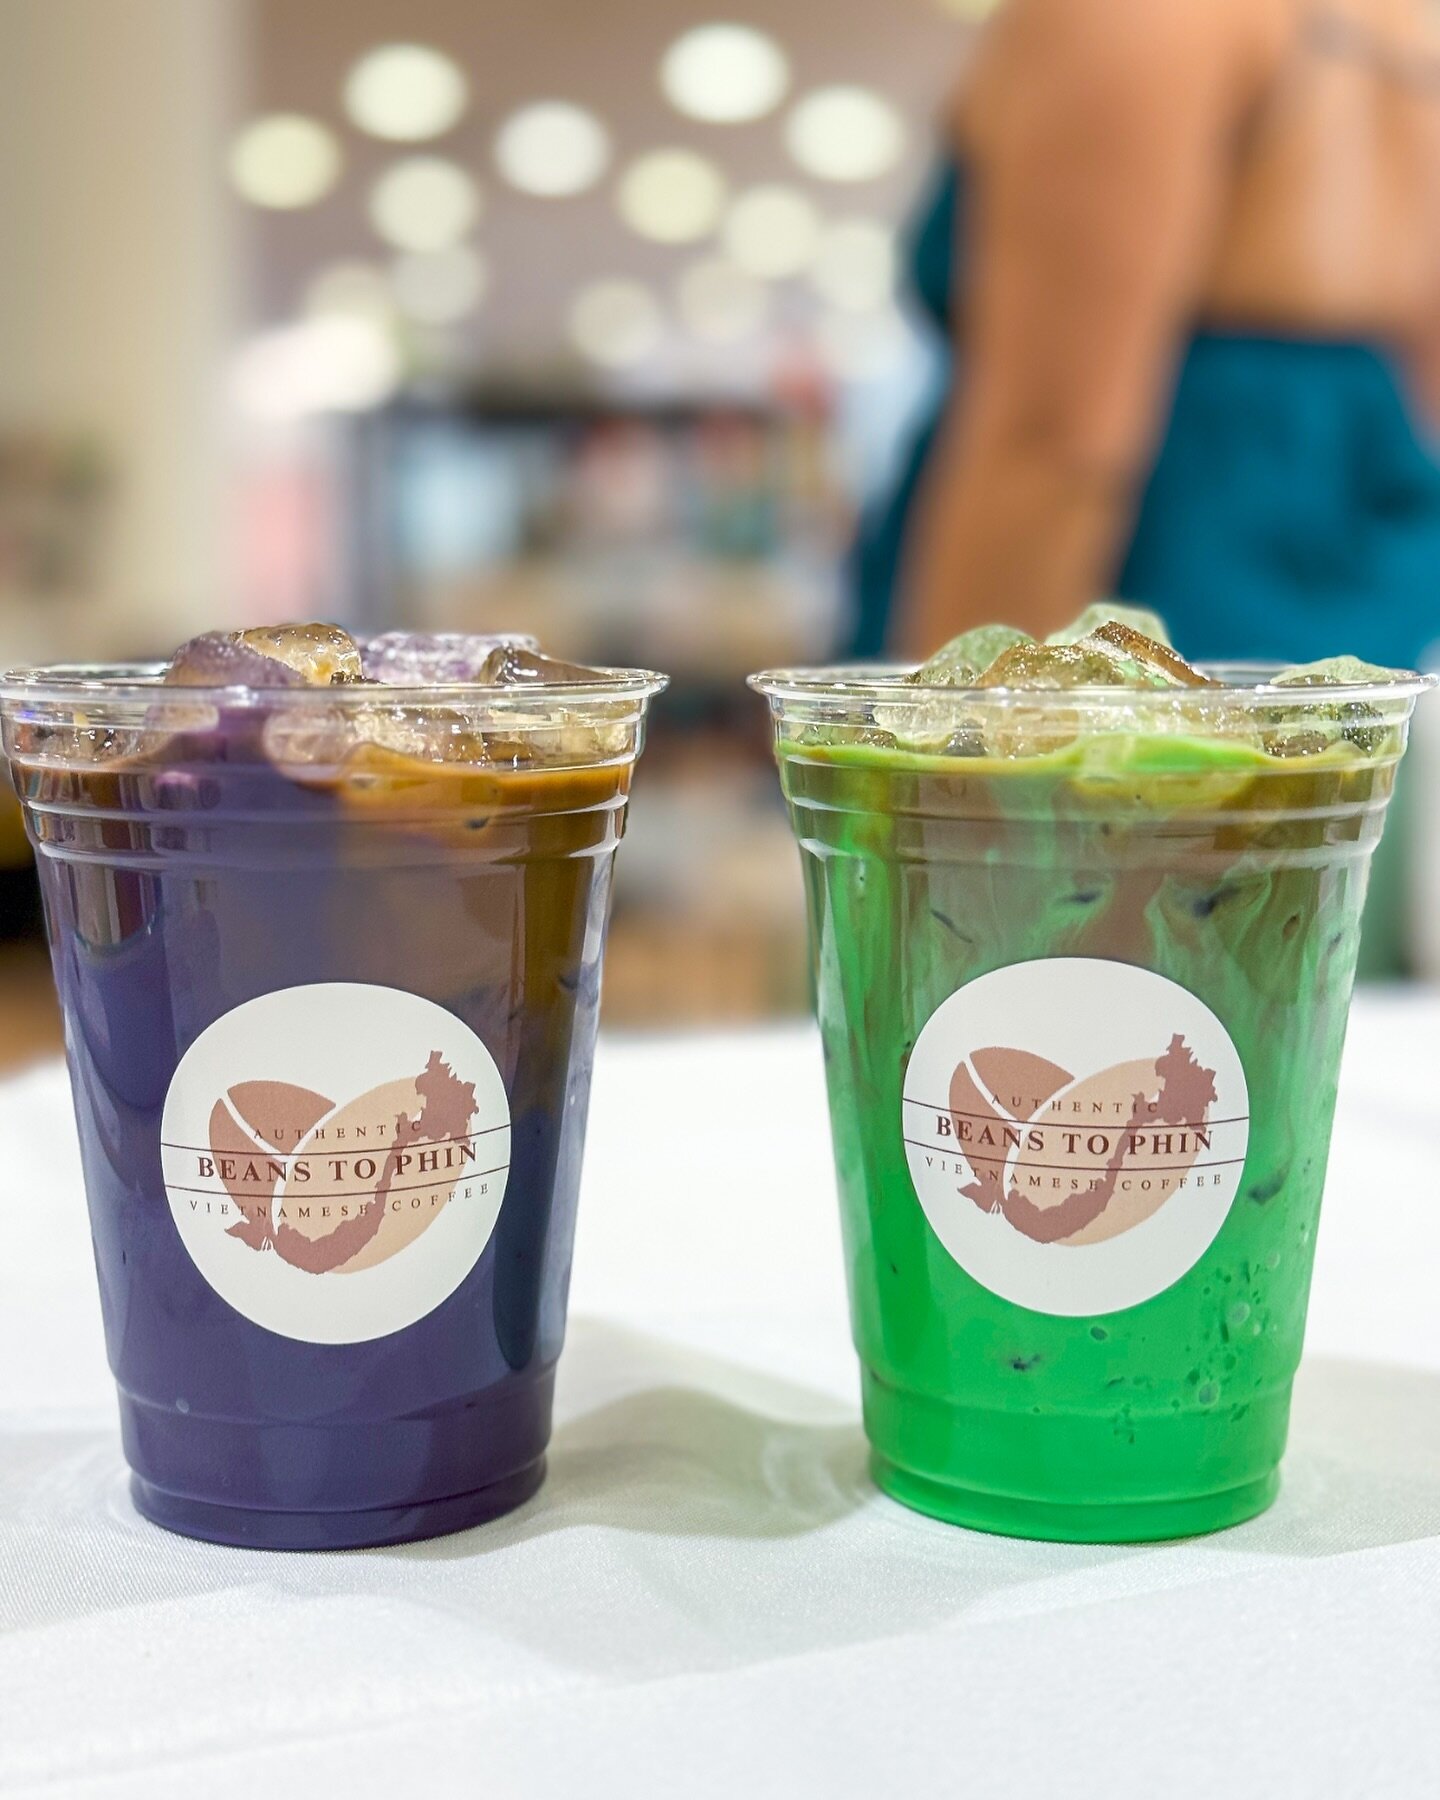 Are you team 💜ubephoria latte or 💚pandan paradise latte?

Both ube (purple yam) and pandan (screw pine leaf) are natural ingredients derived from plants commonly found in Southeast Asia. 

They both have distinct flavors and are known for their vib